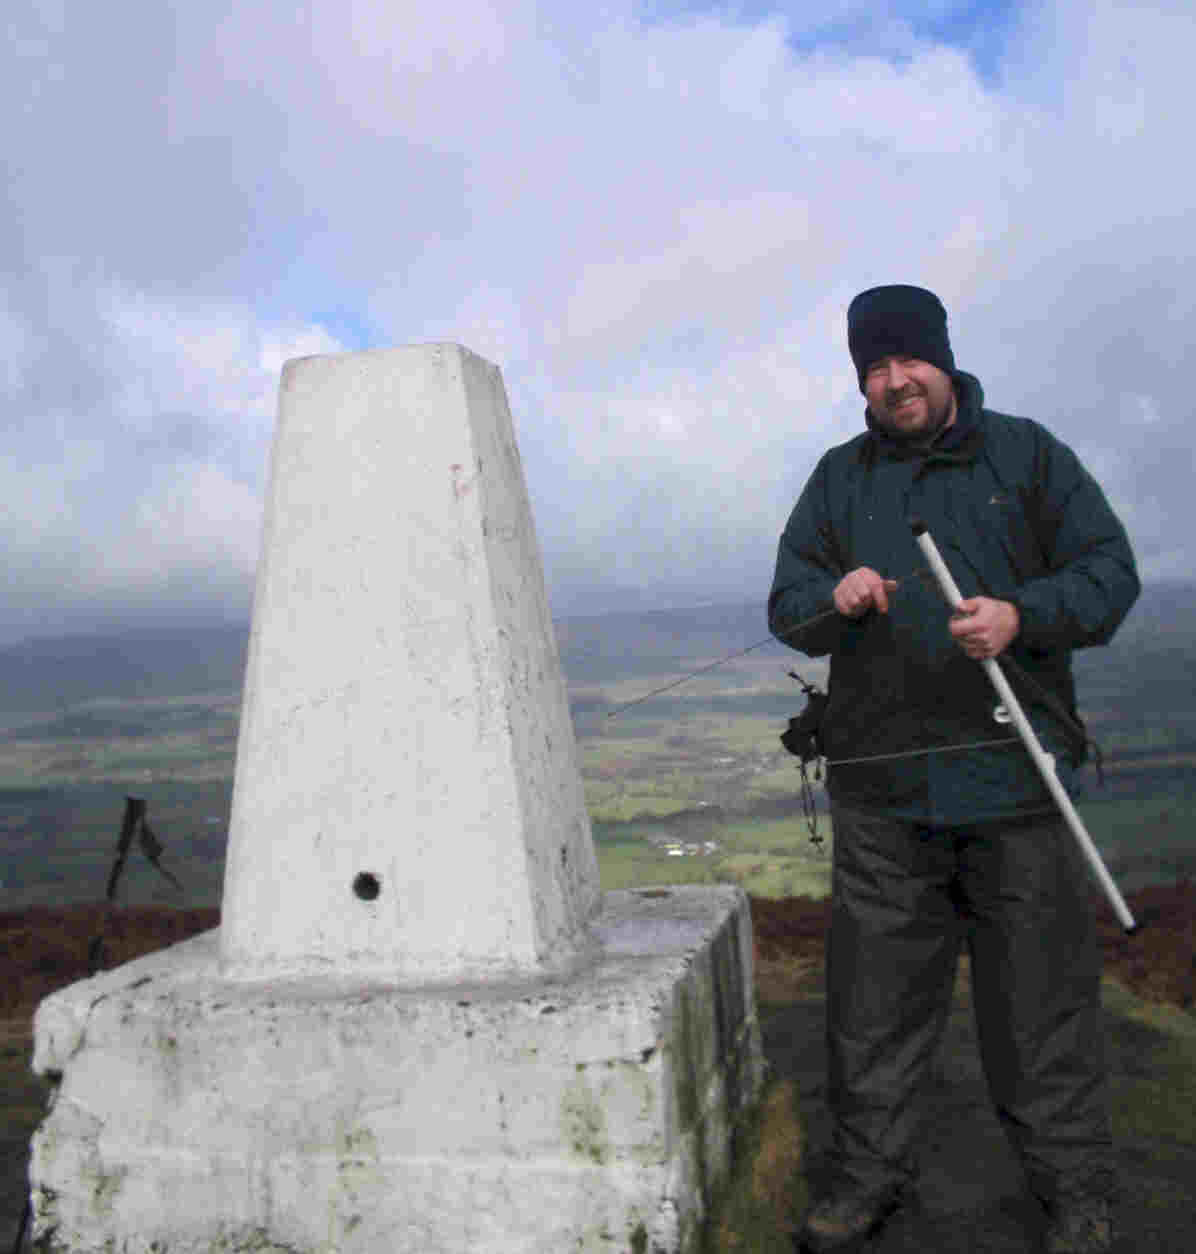 Setting up the SOTA Beam on SP-014